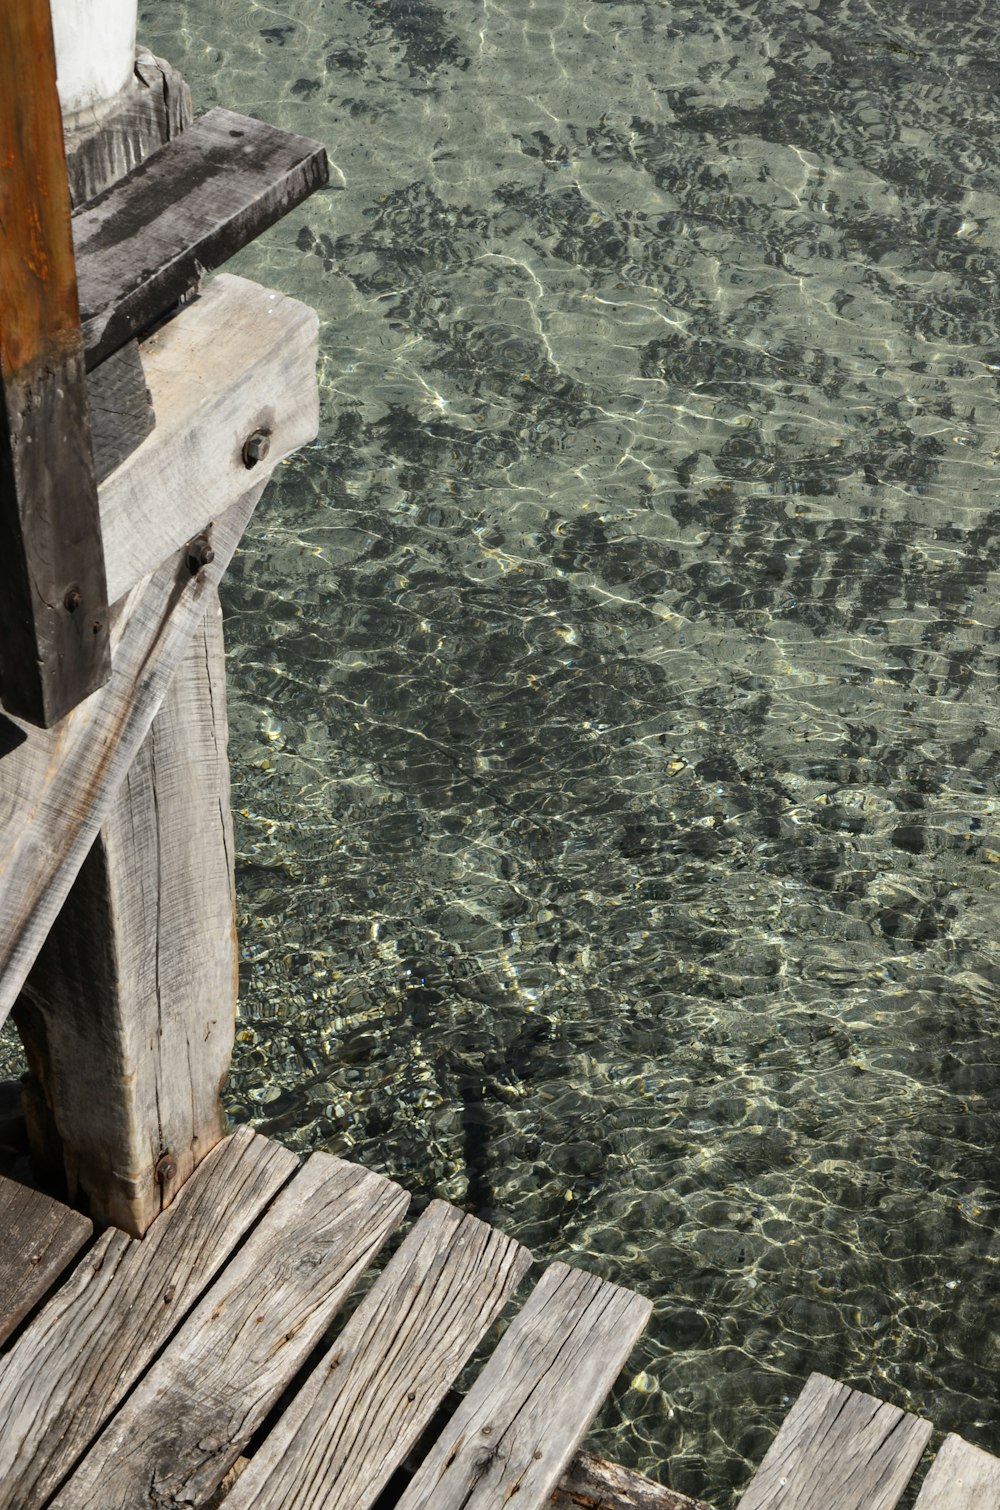 the water is crystal clear and the dock is made of wood